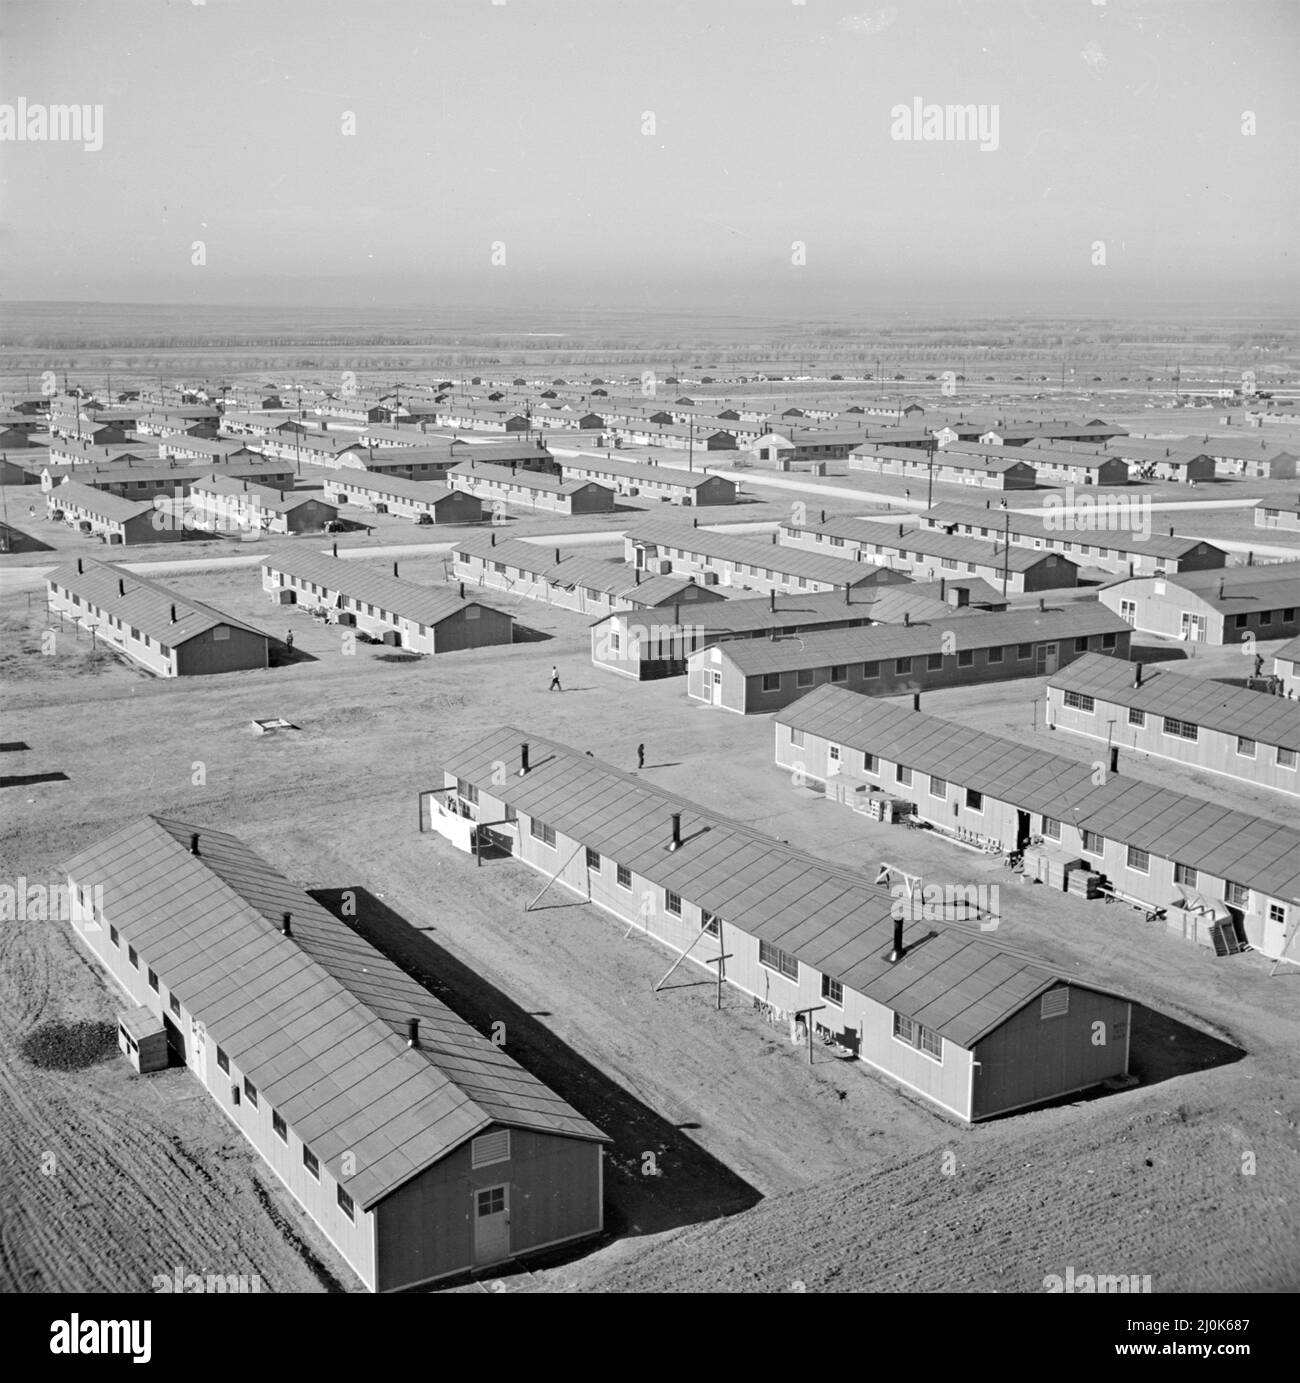 Aerial view of the Granada Relocation Center, an internment camp for Americans of Japanese descent during World War II, December 12, 1942 in Amache, Colorado. The site of Camp Amache was declared a National Historic Site by President Joe Biden on March 18, 2022. Stock Photo